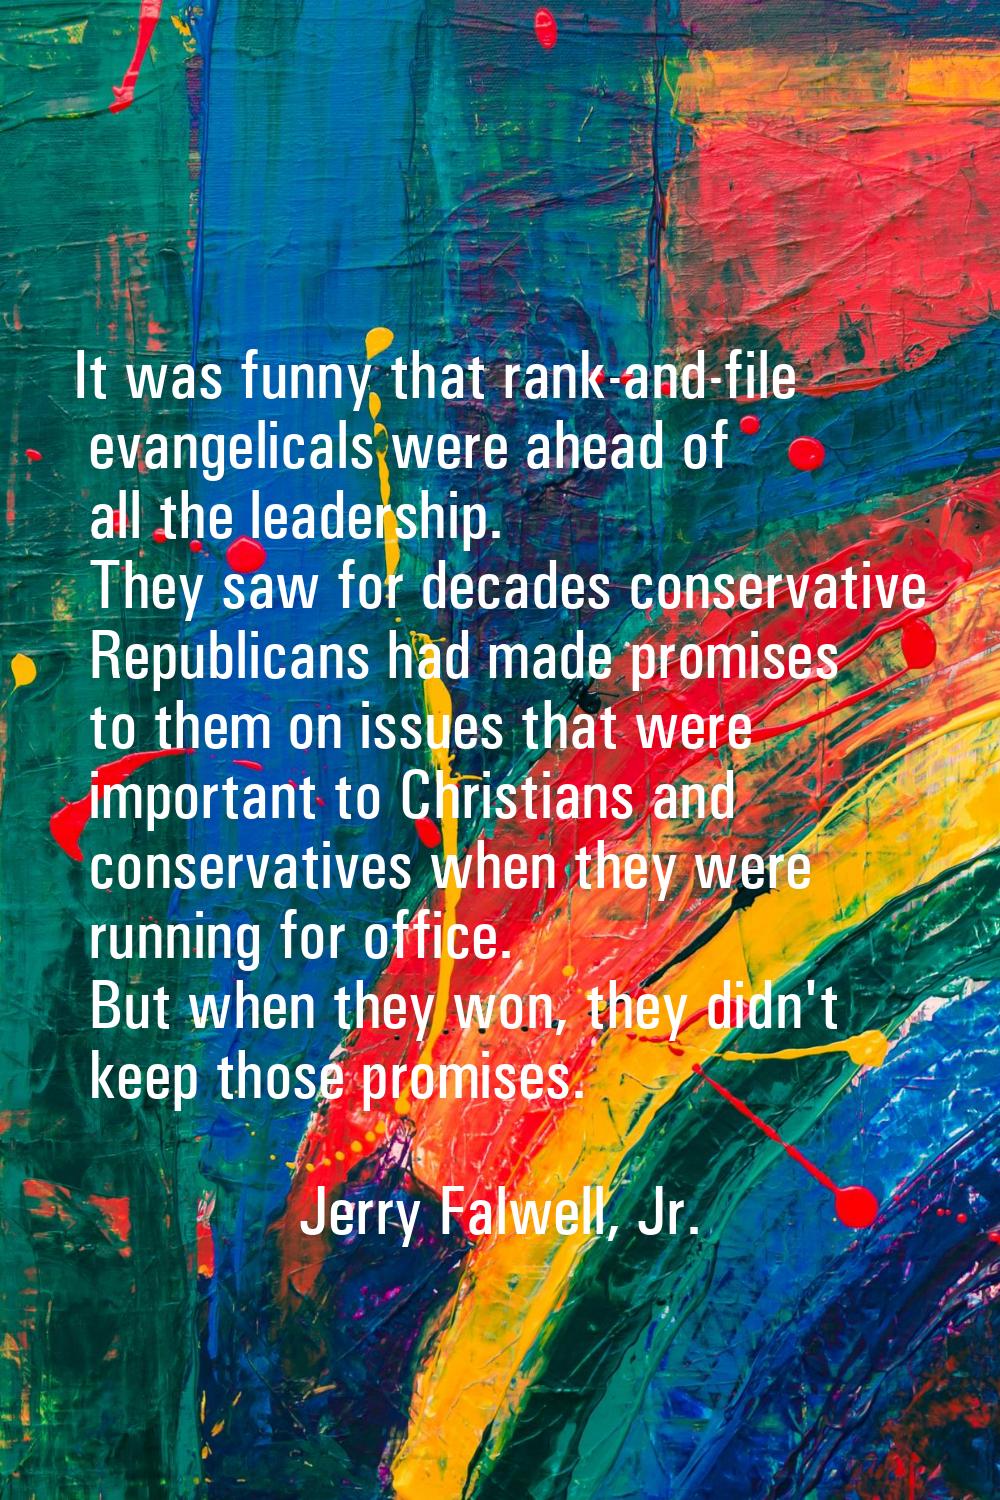 It was funny that rank-and-file evangelicals were ahead of all the leadership. They saw for decades